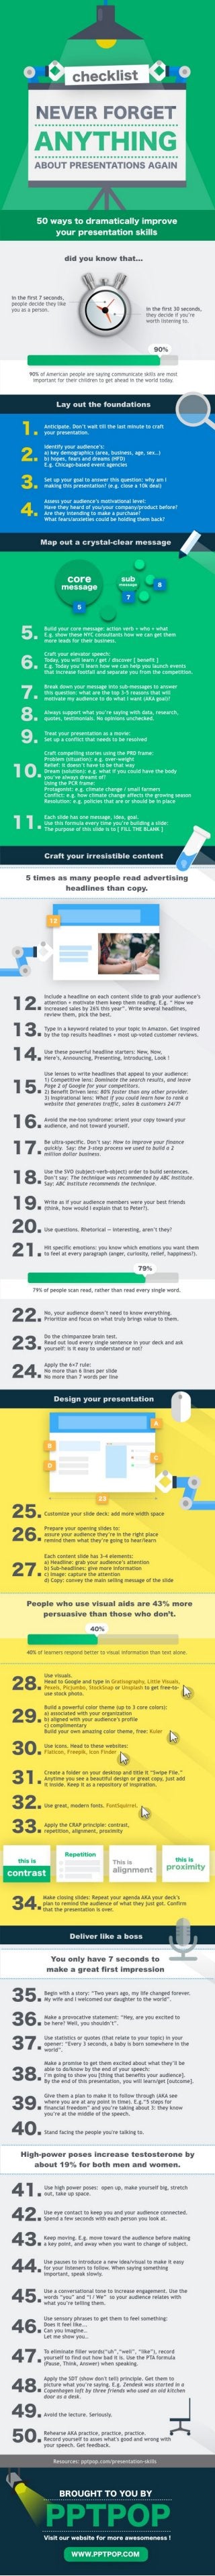 50 Ways to Boost Your Presentation Skills [Infographic]